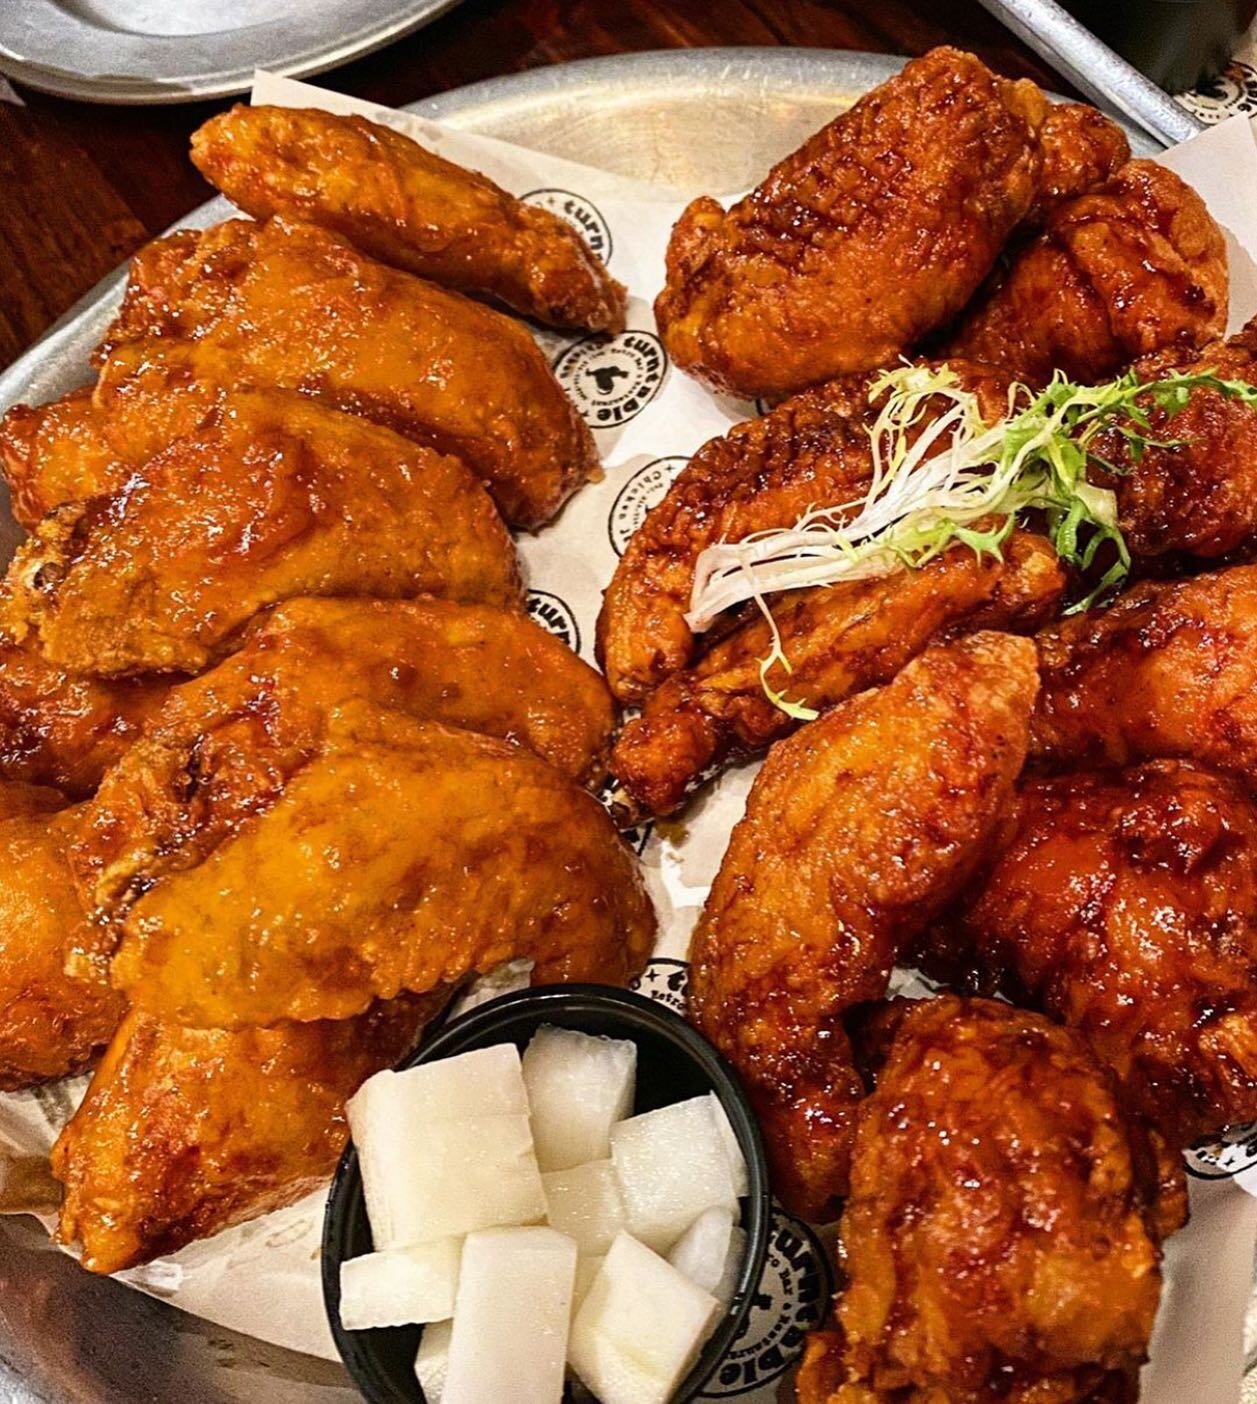 Order our incredible Korean Fried Chicken for pickup at @turntablelpbar32!

Order online at www.turntable32.com

Photo by @hannahmoon_eatz